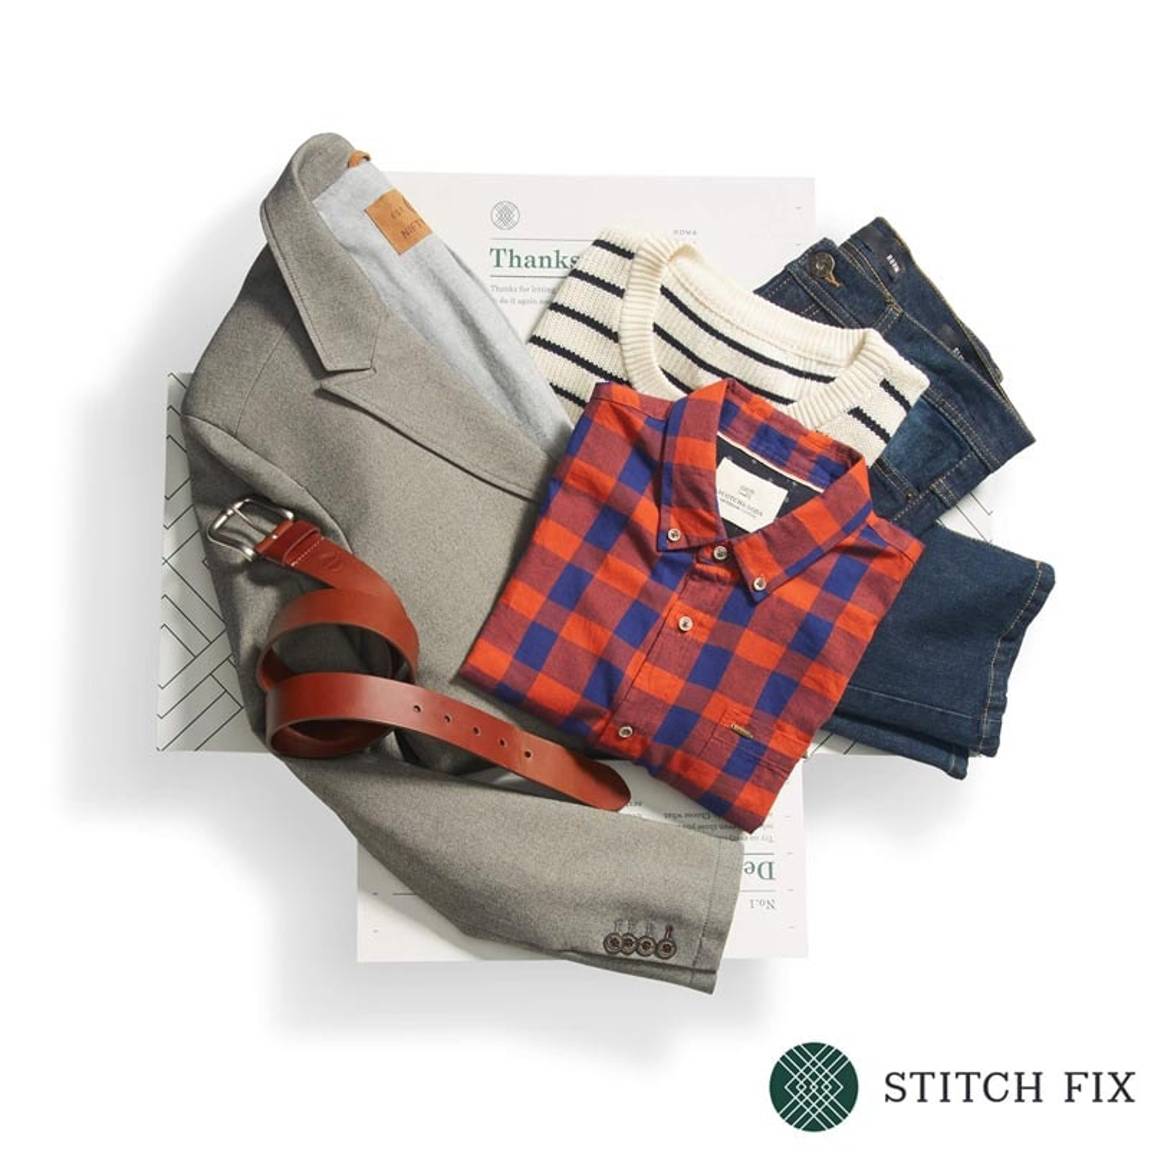 Interview: what Stitch Fix can teach us about the future of retail